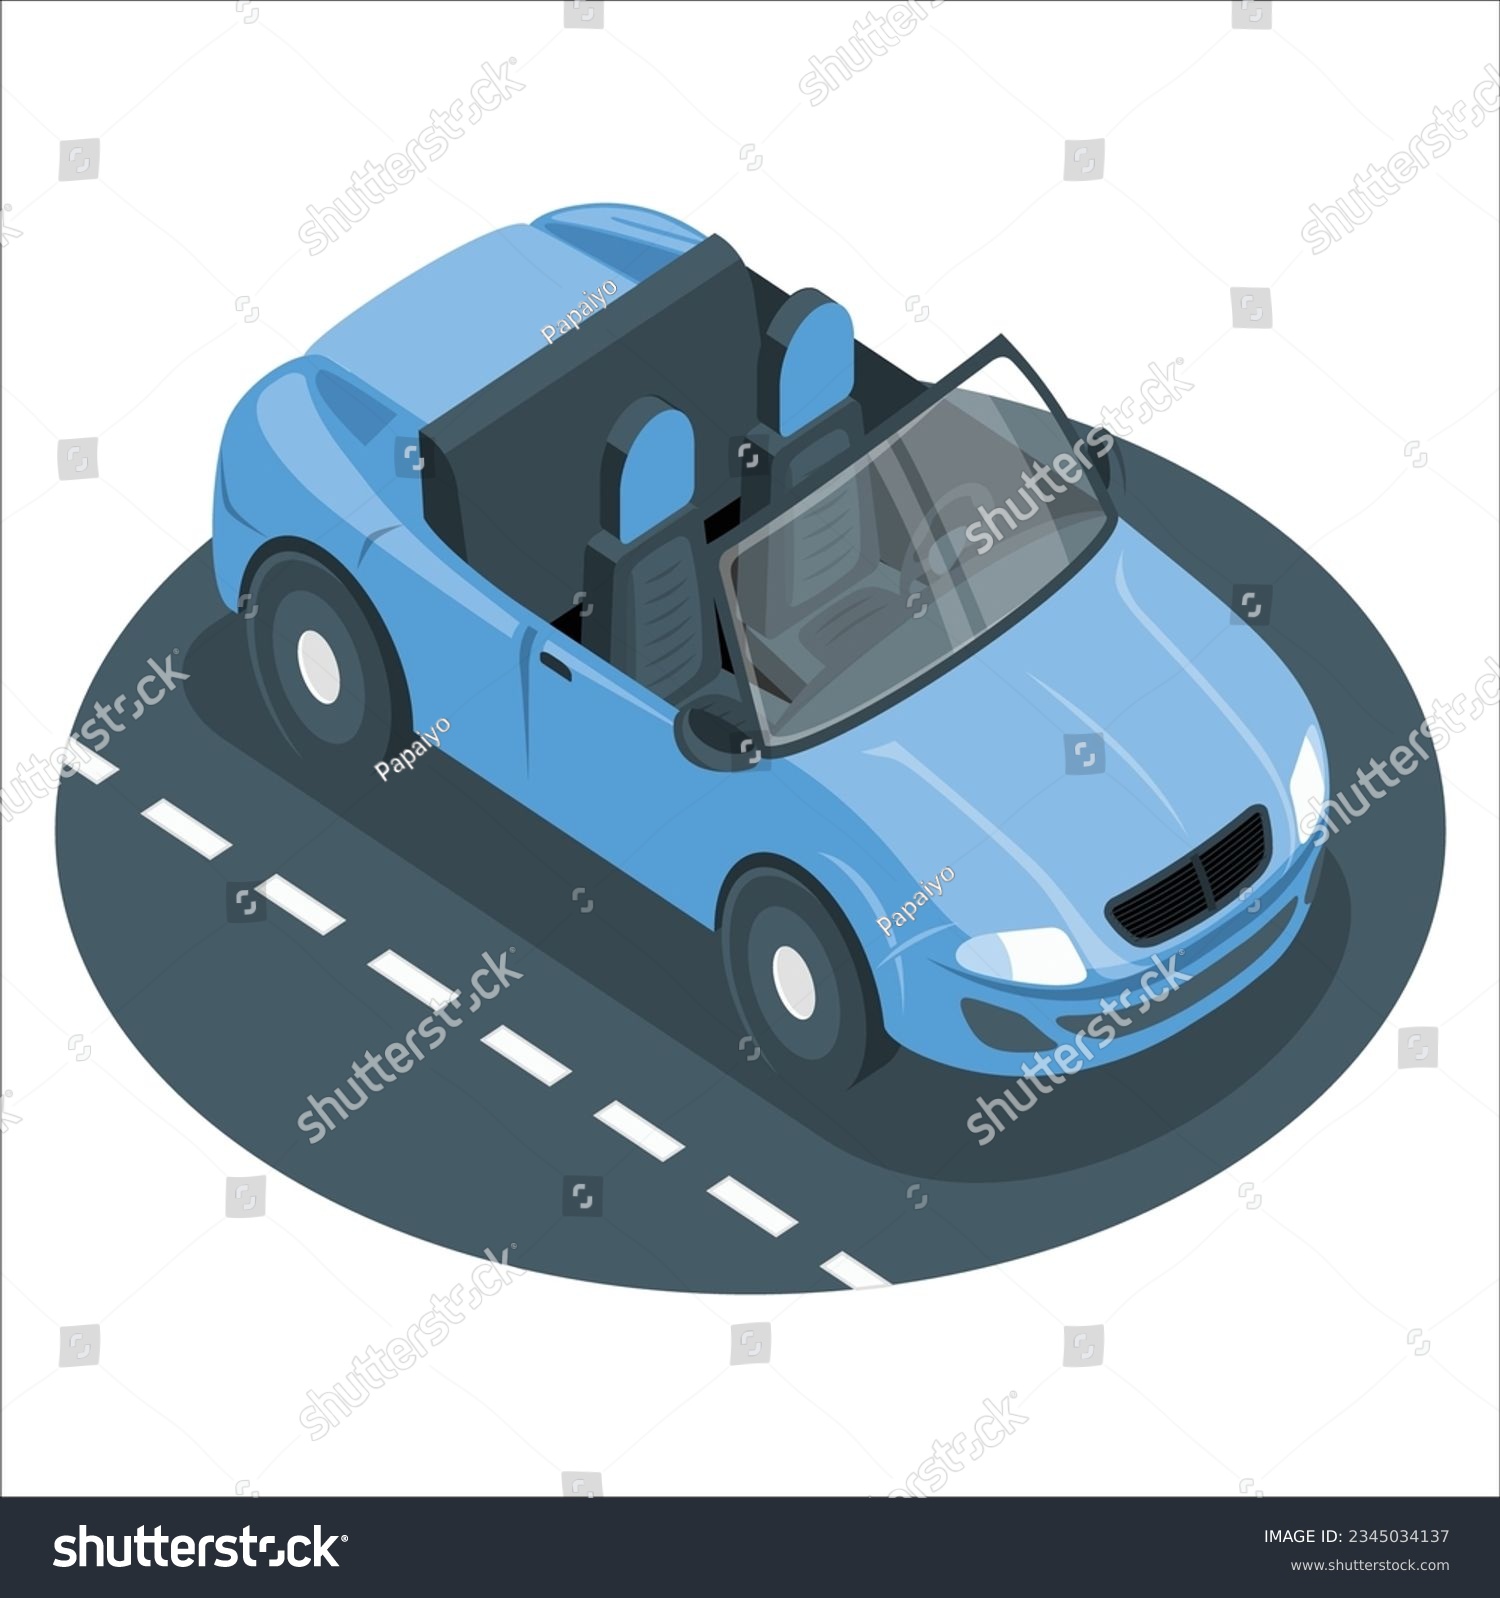 SVG of Futuristic sports car in motion - front perspective view. 3d render, 3d illustration. A modern and elegant black car illuminated. 3d rendering of a brand less generic car design in a tunnel. 2259  svg